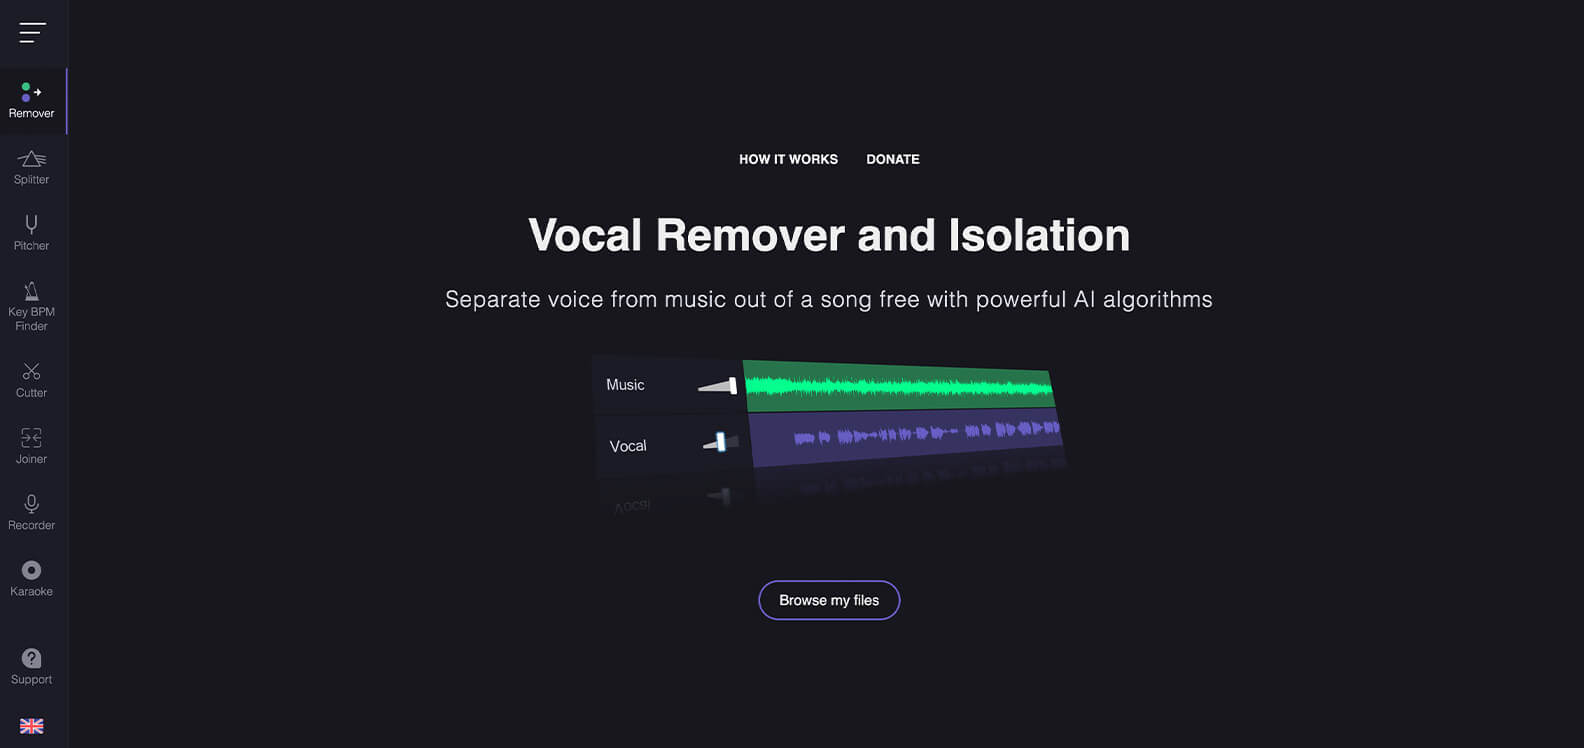 Post: Vocal Remover